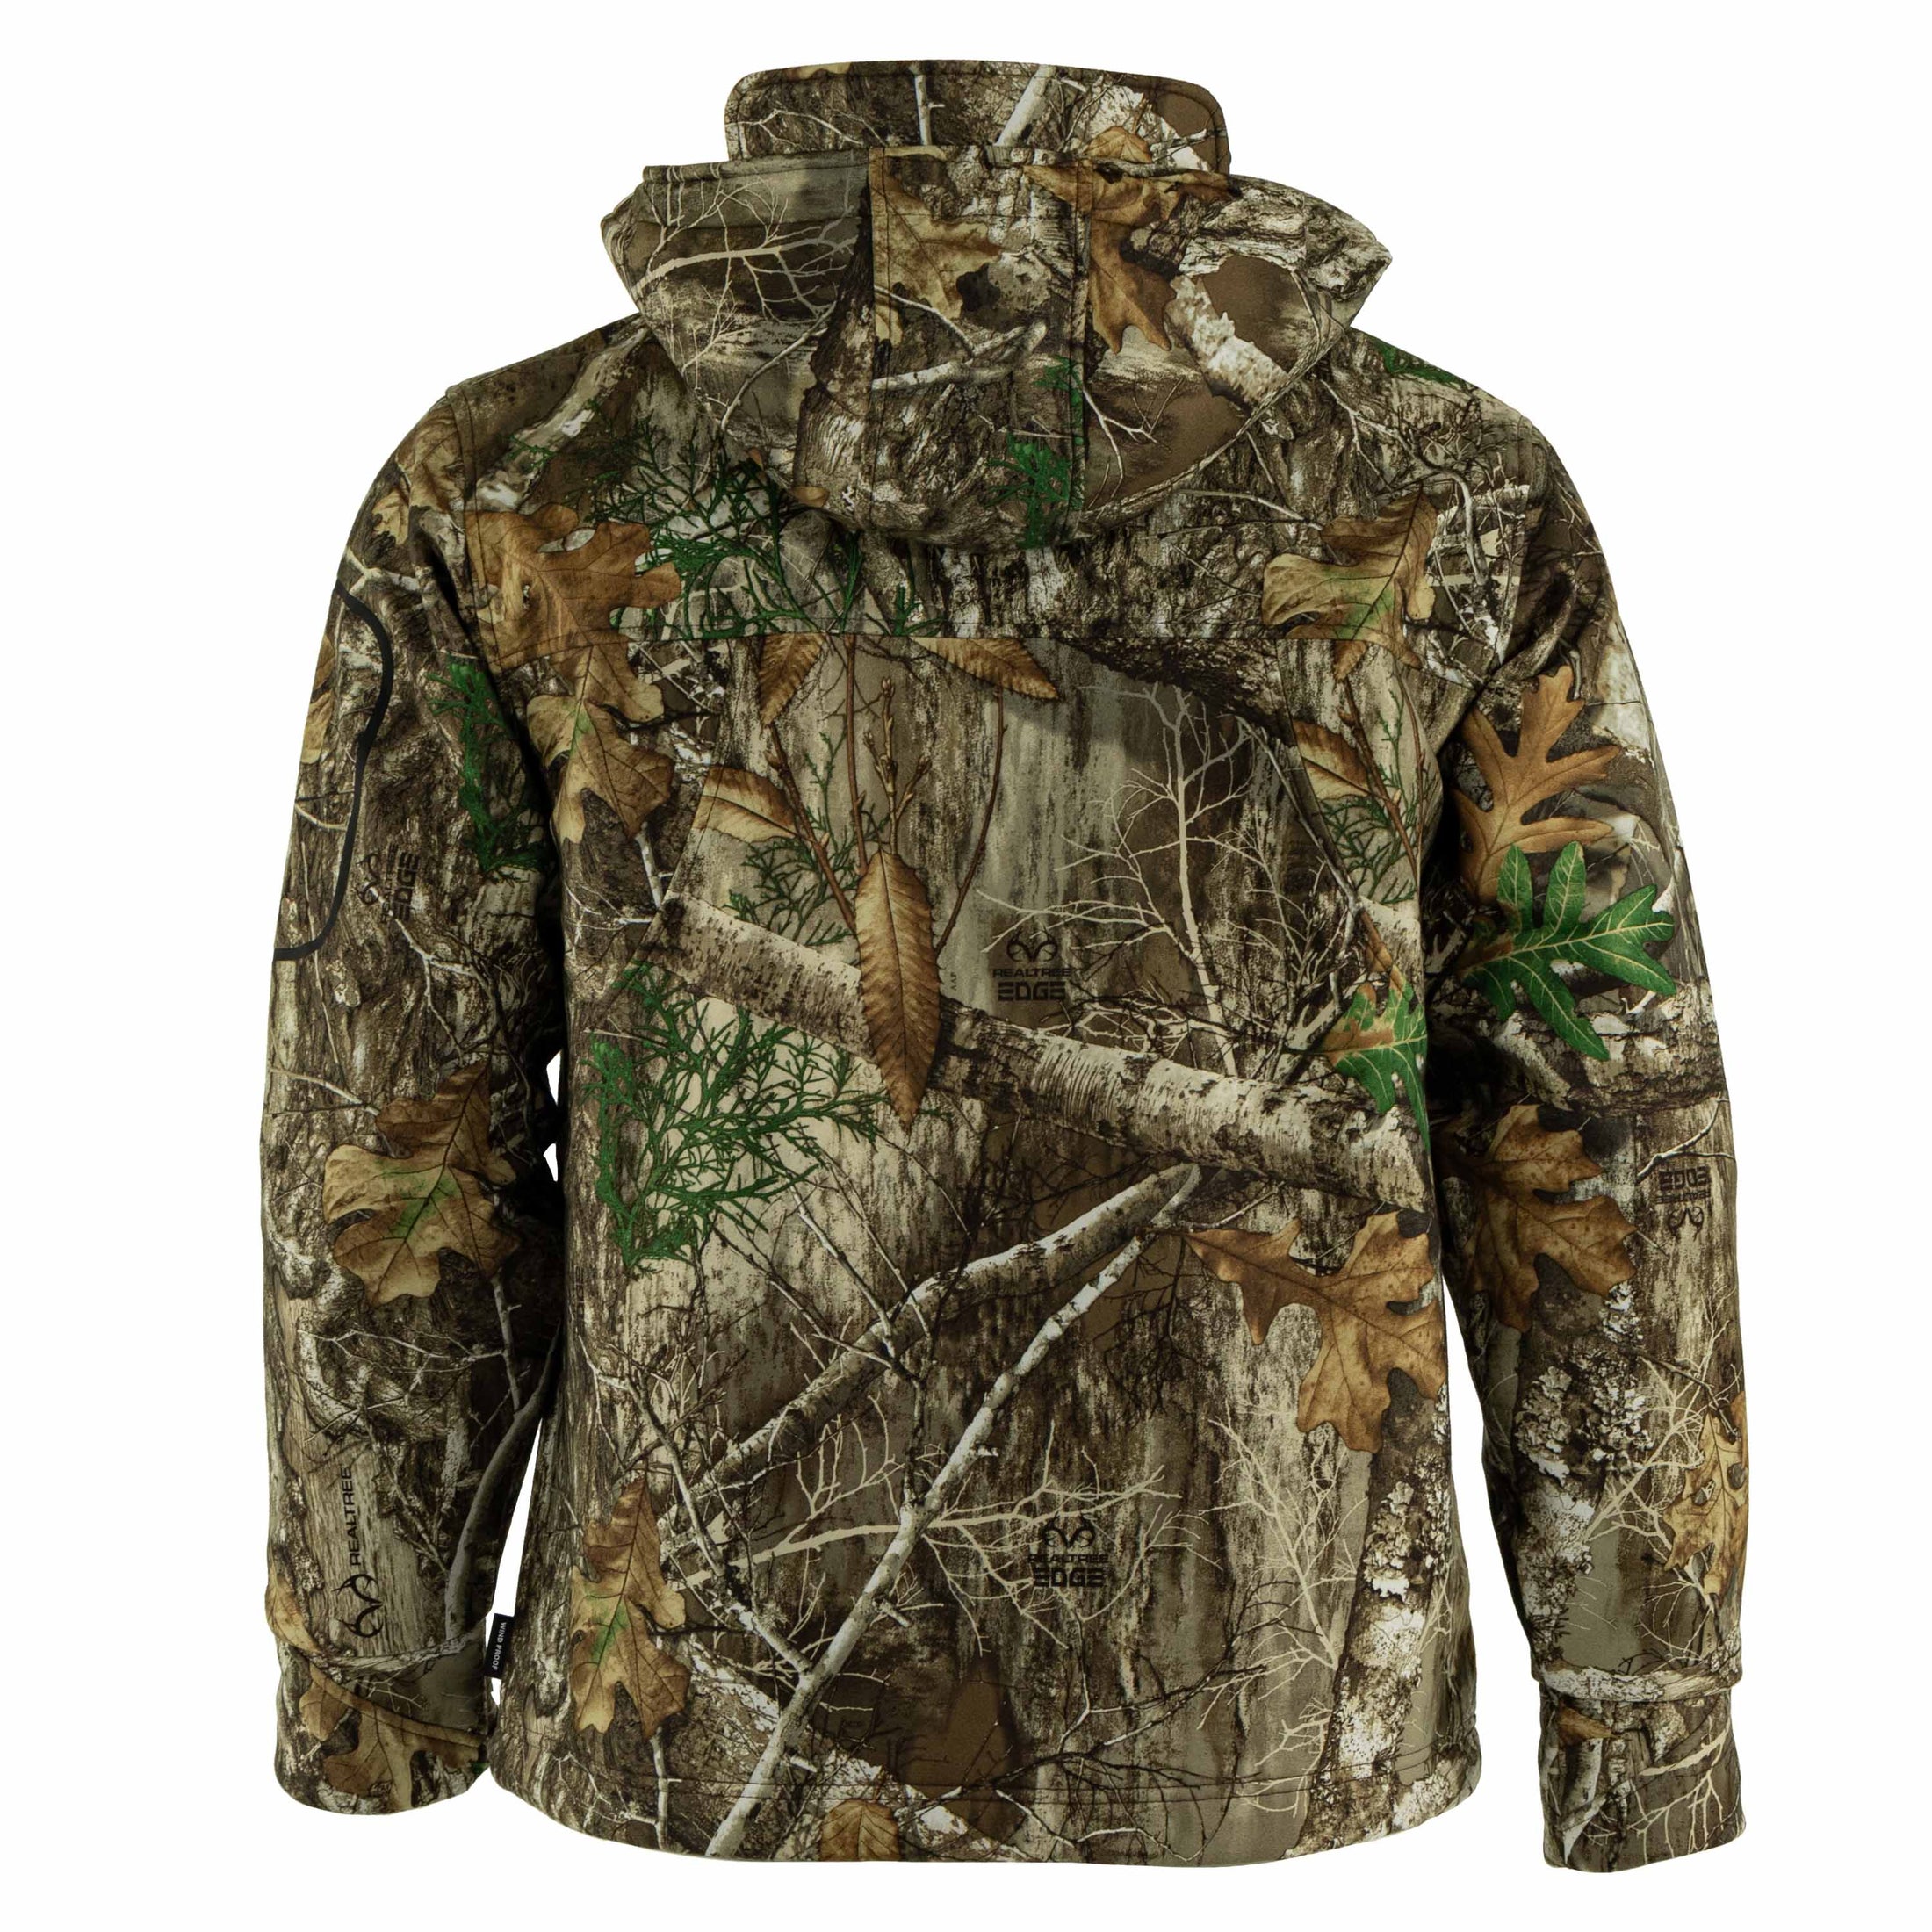 gamehide whitetail jacket back view (realtree edge)